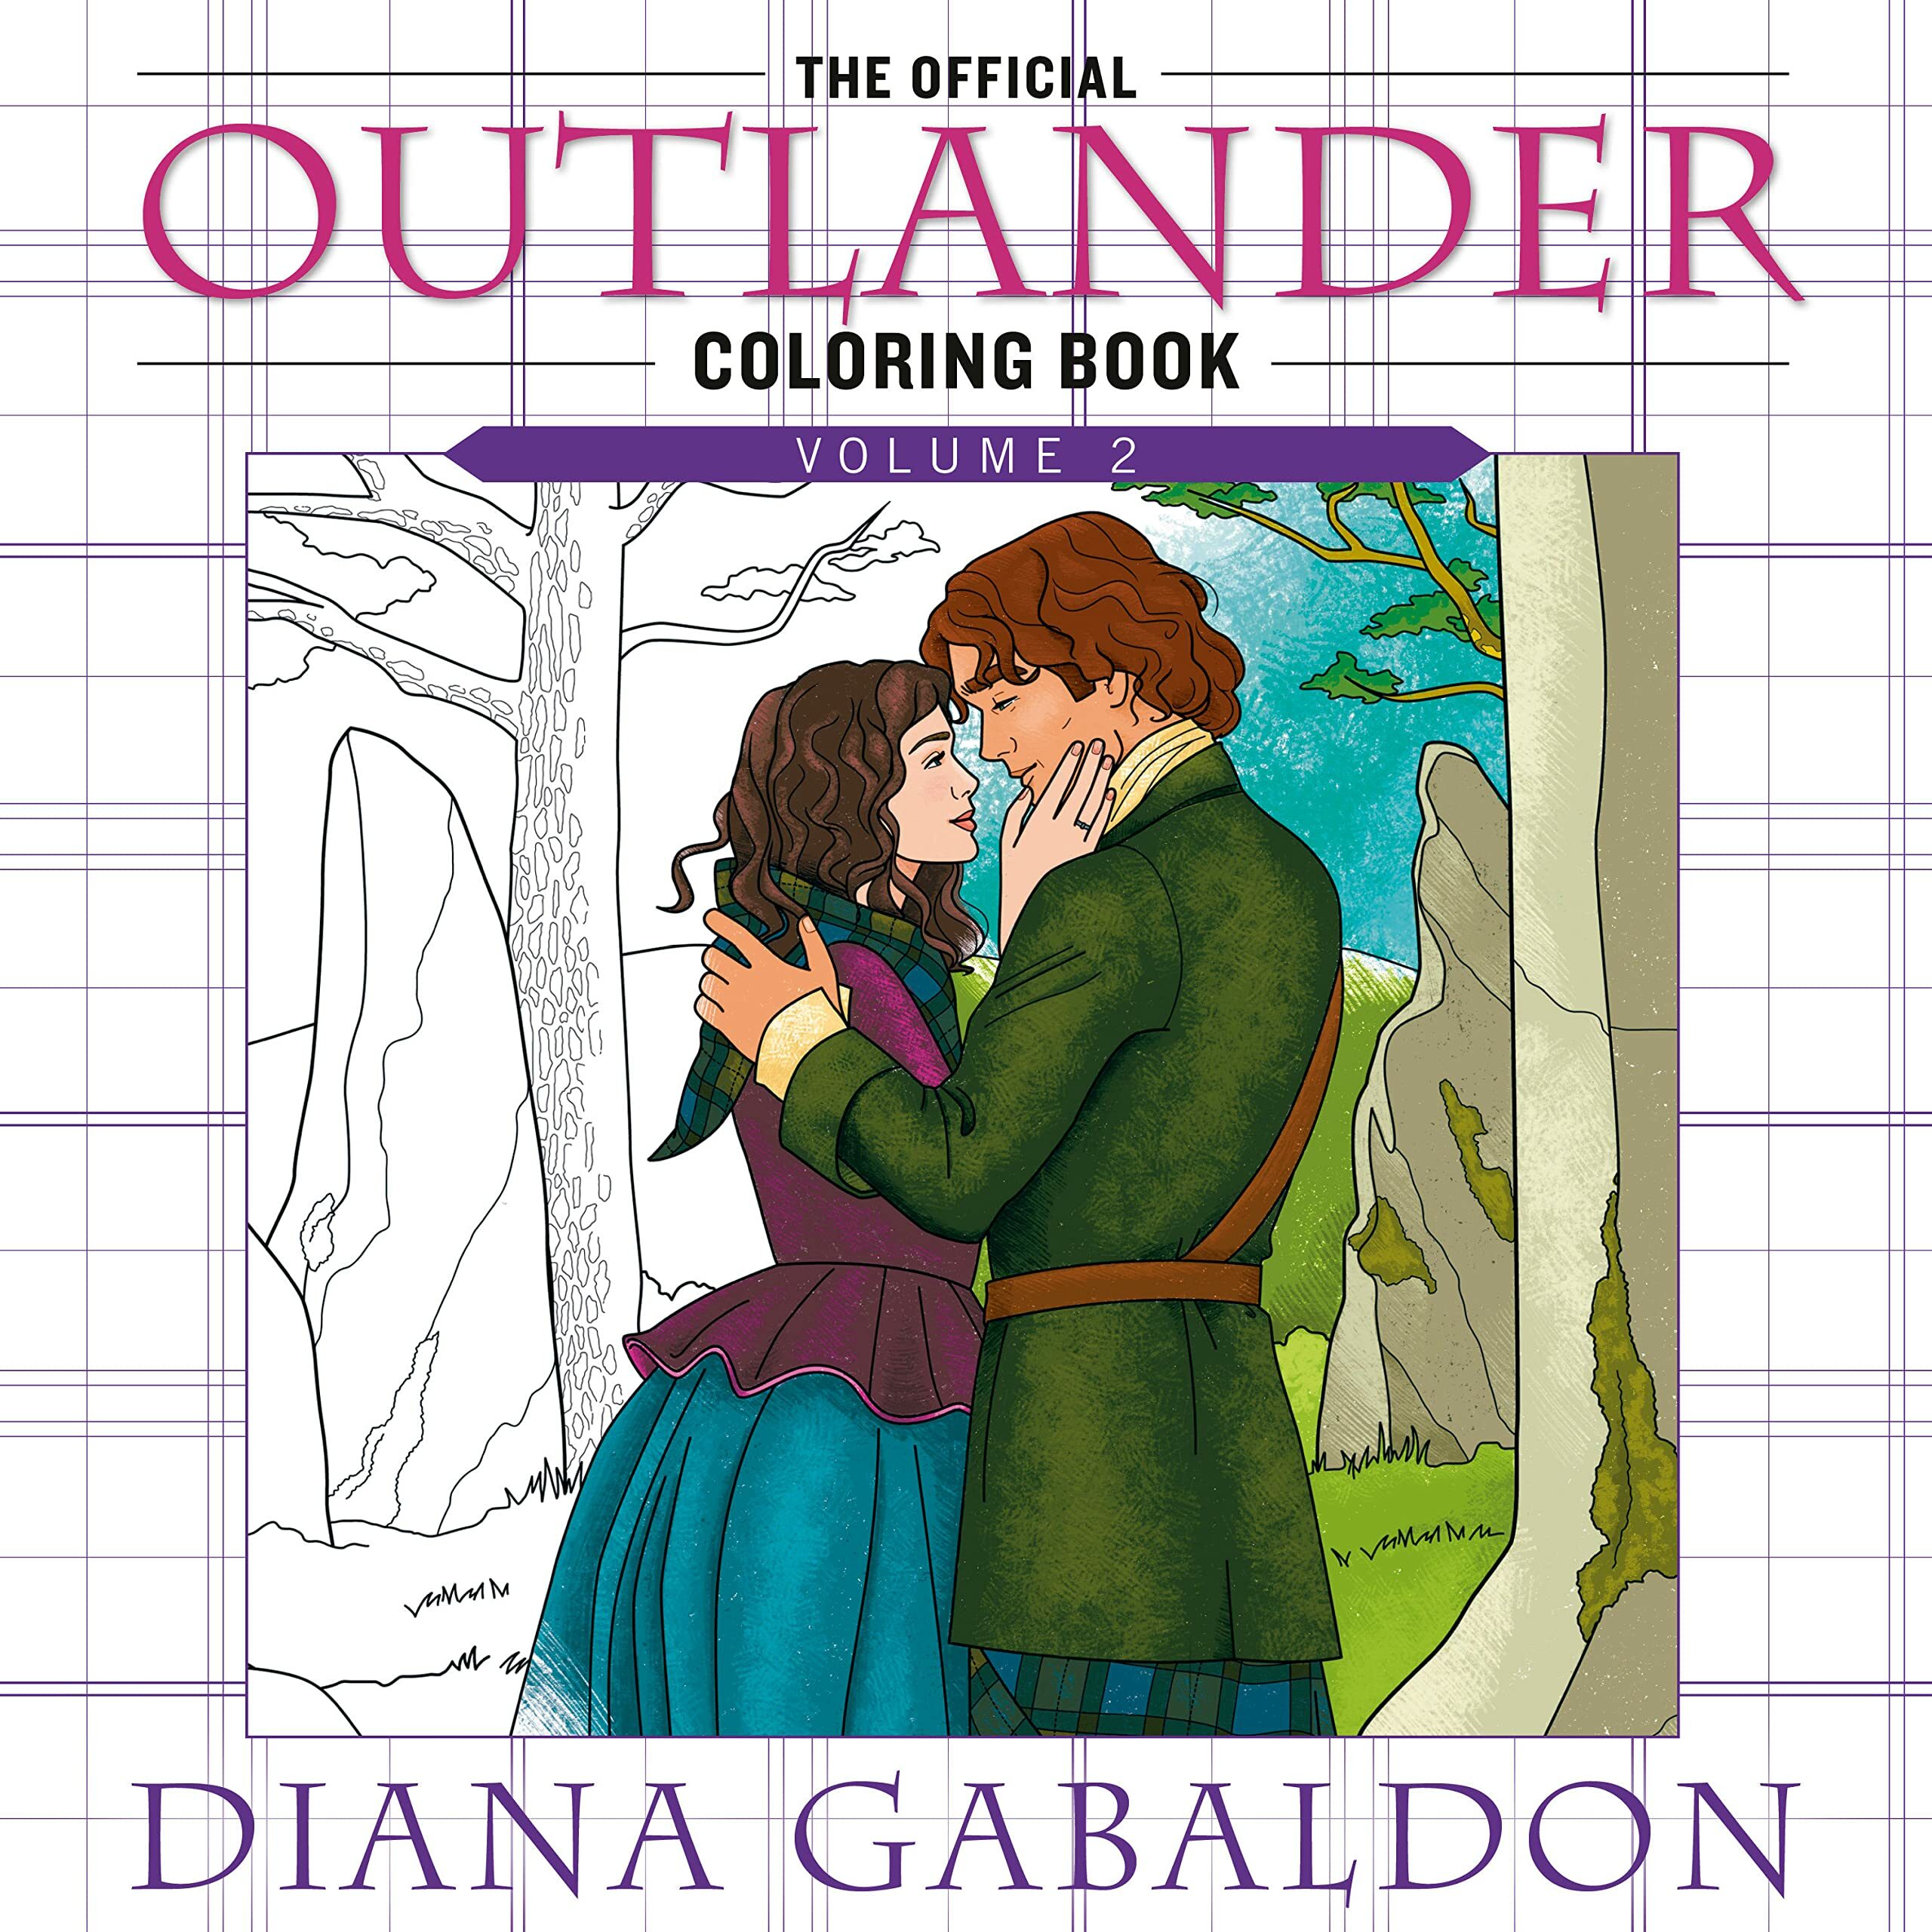 The Official Outlander Coloring Book #2